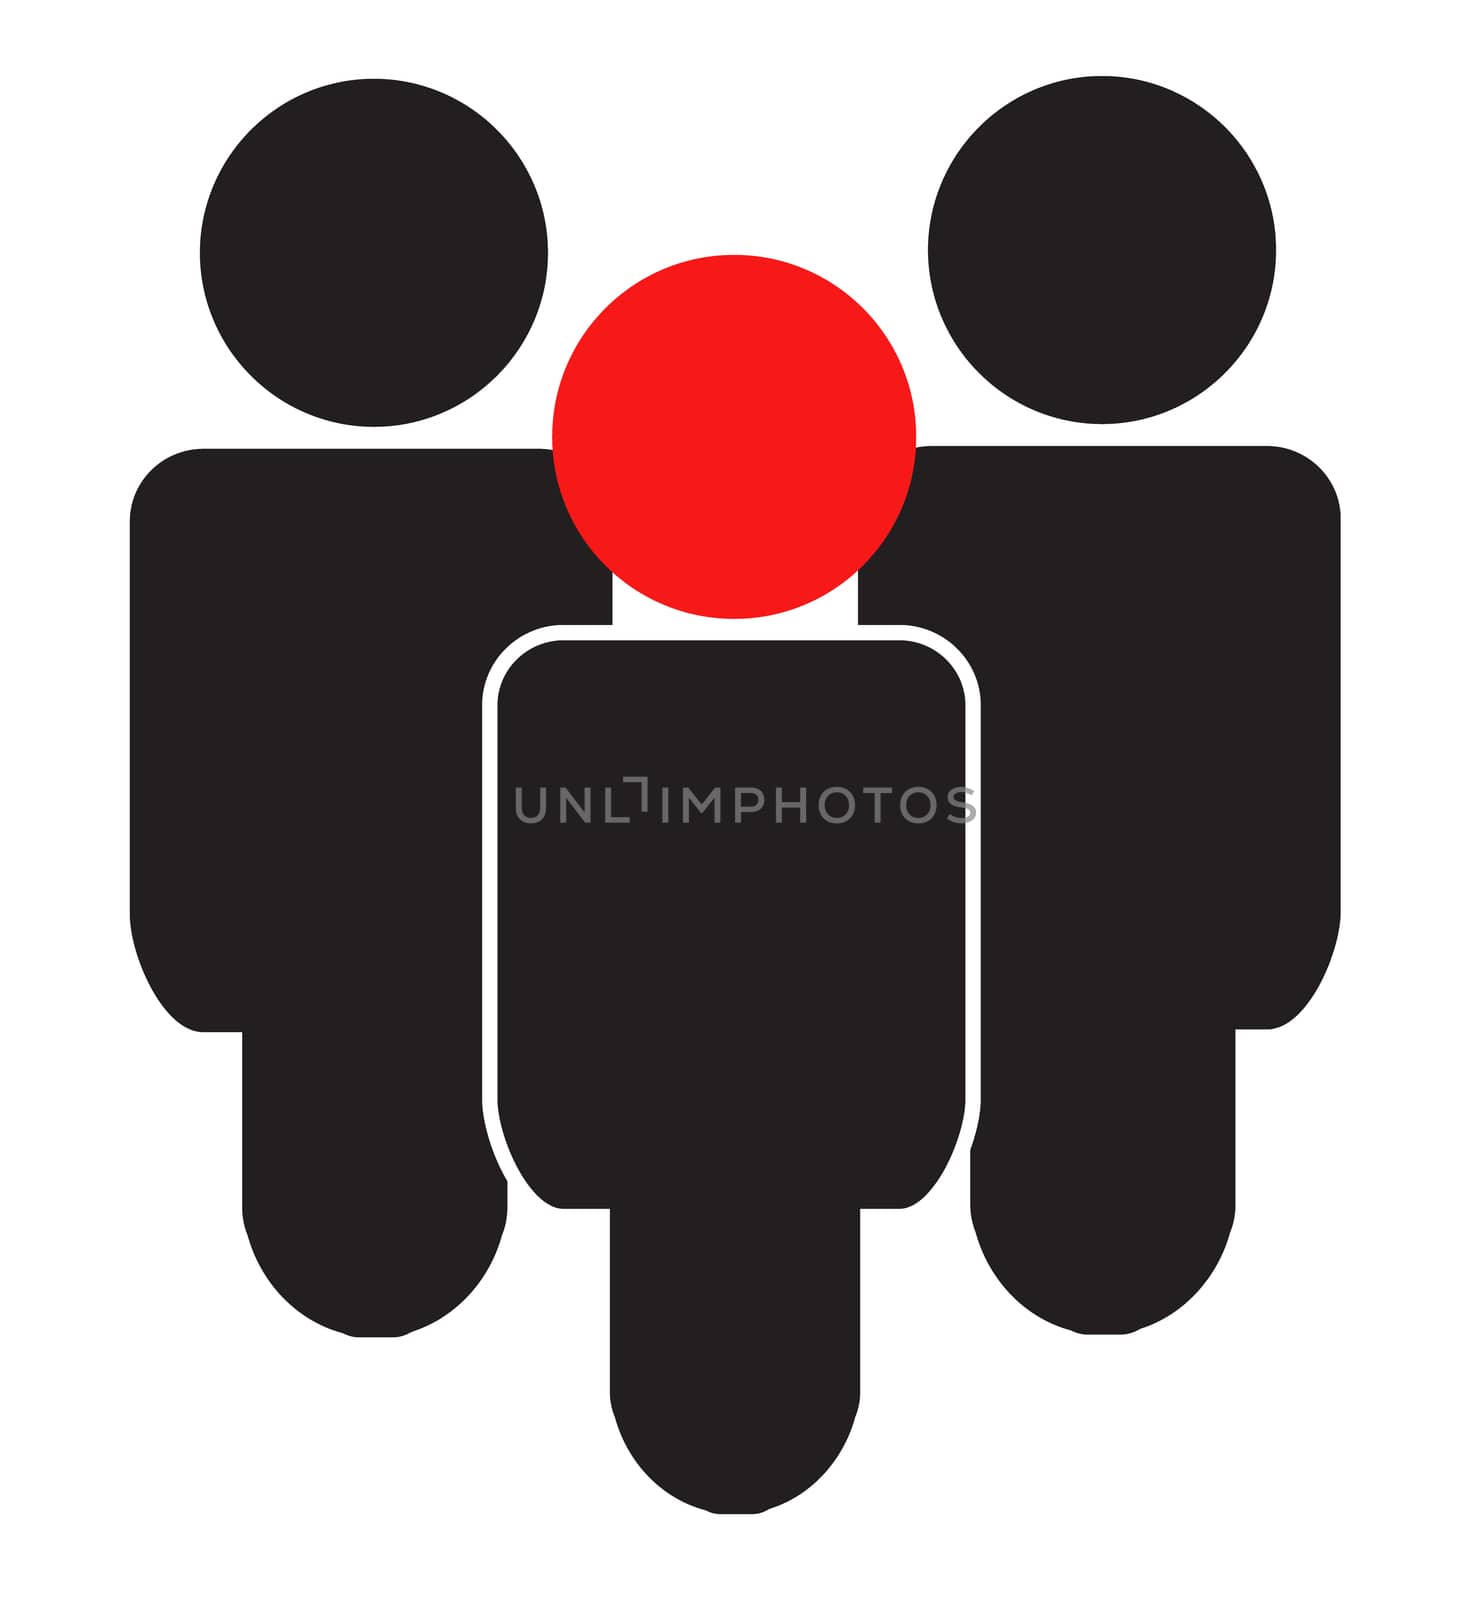 Gray Group People icon isolated. Modern simple flat team male si by suthee